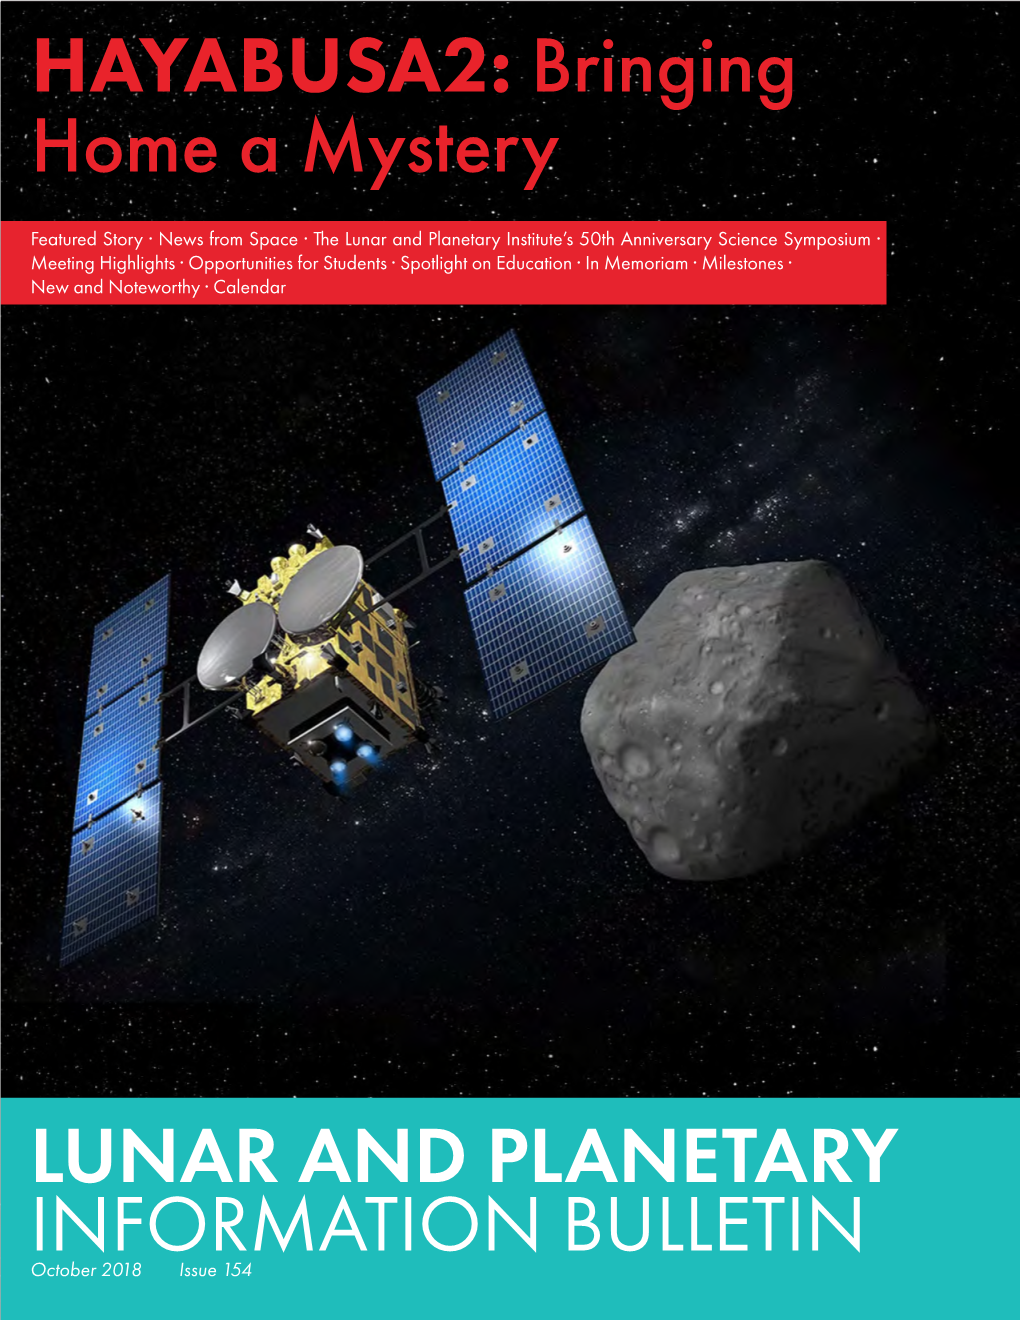 Lunar and Planetary Information Bulletin